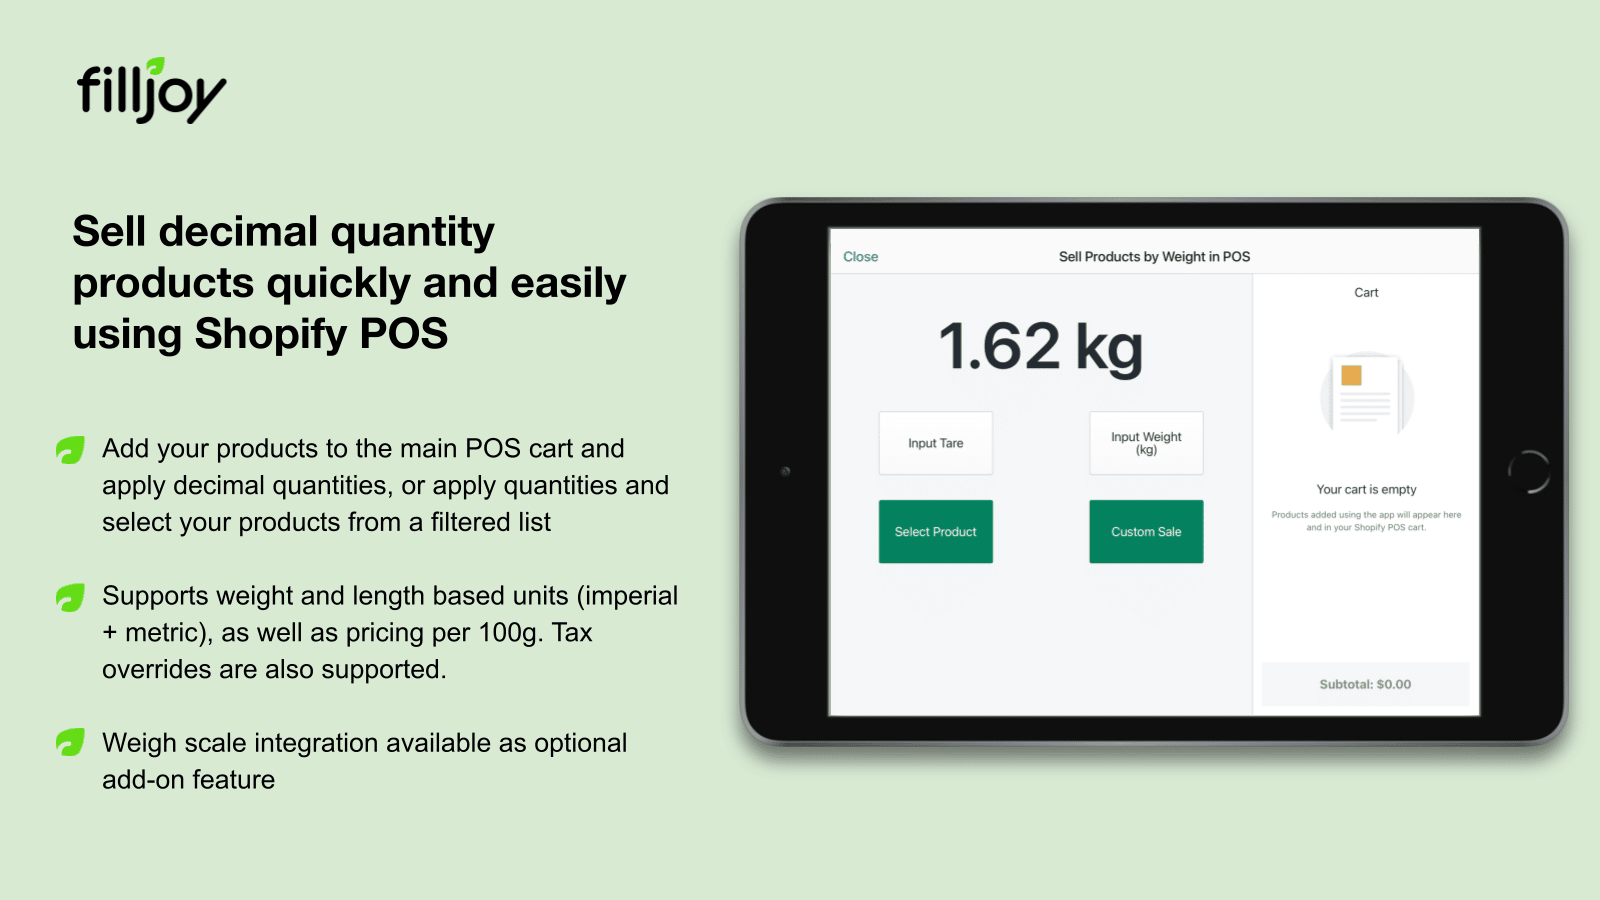 Sell Products by Weight in POS